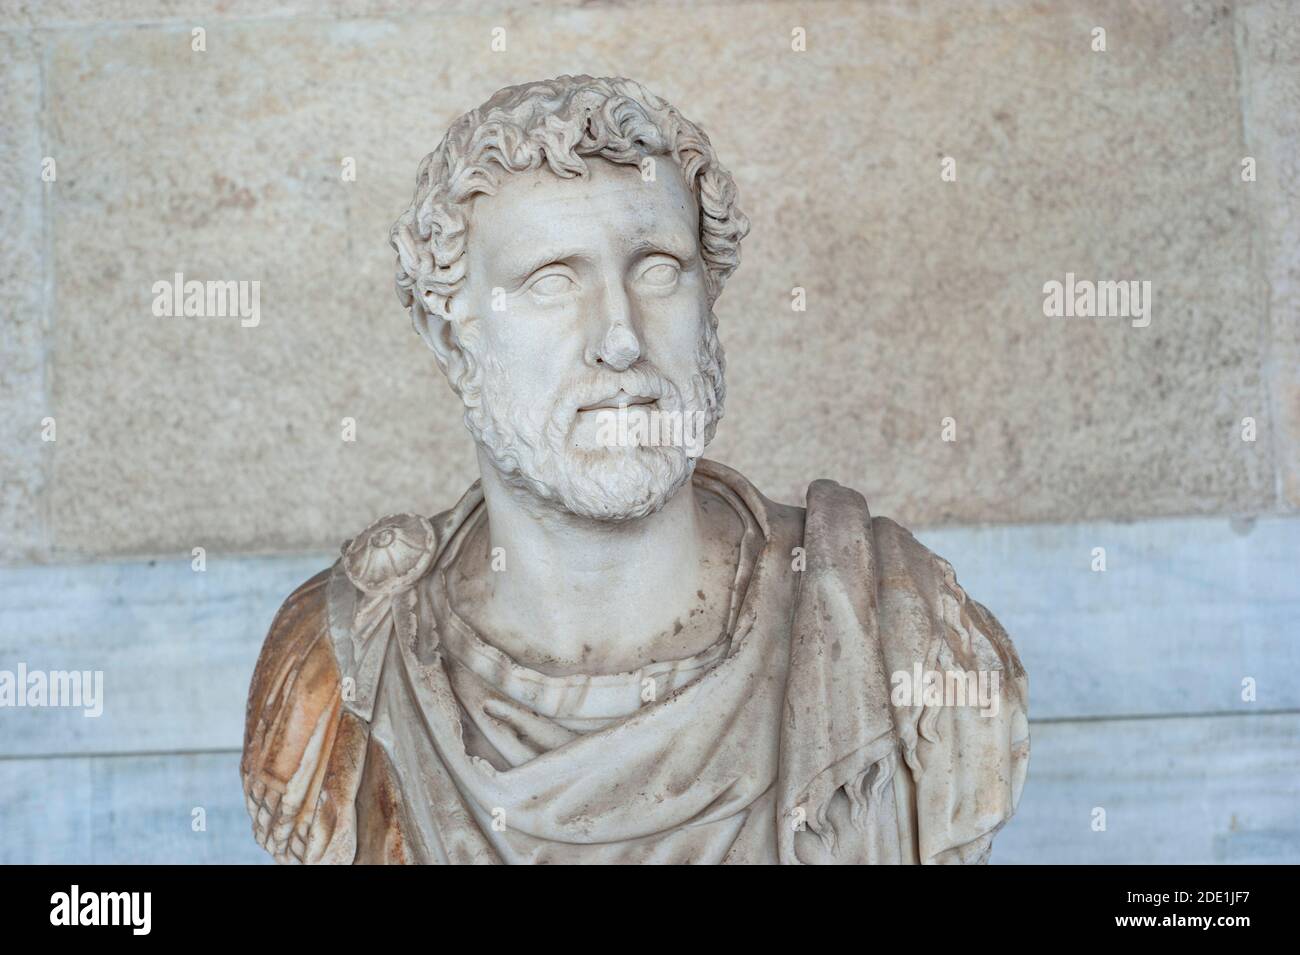 Portrait bust of the emperor Antoninus Pius ( 138 -161 ad) exhibited in the museum of Stoa of Attalos, Athens, Greece Stock Photo